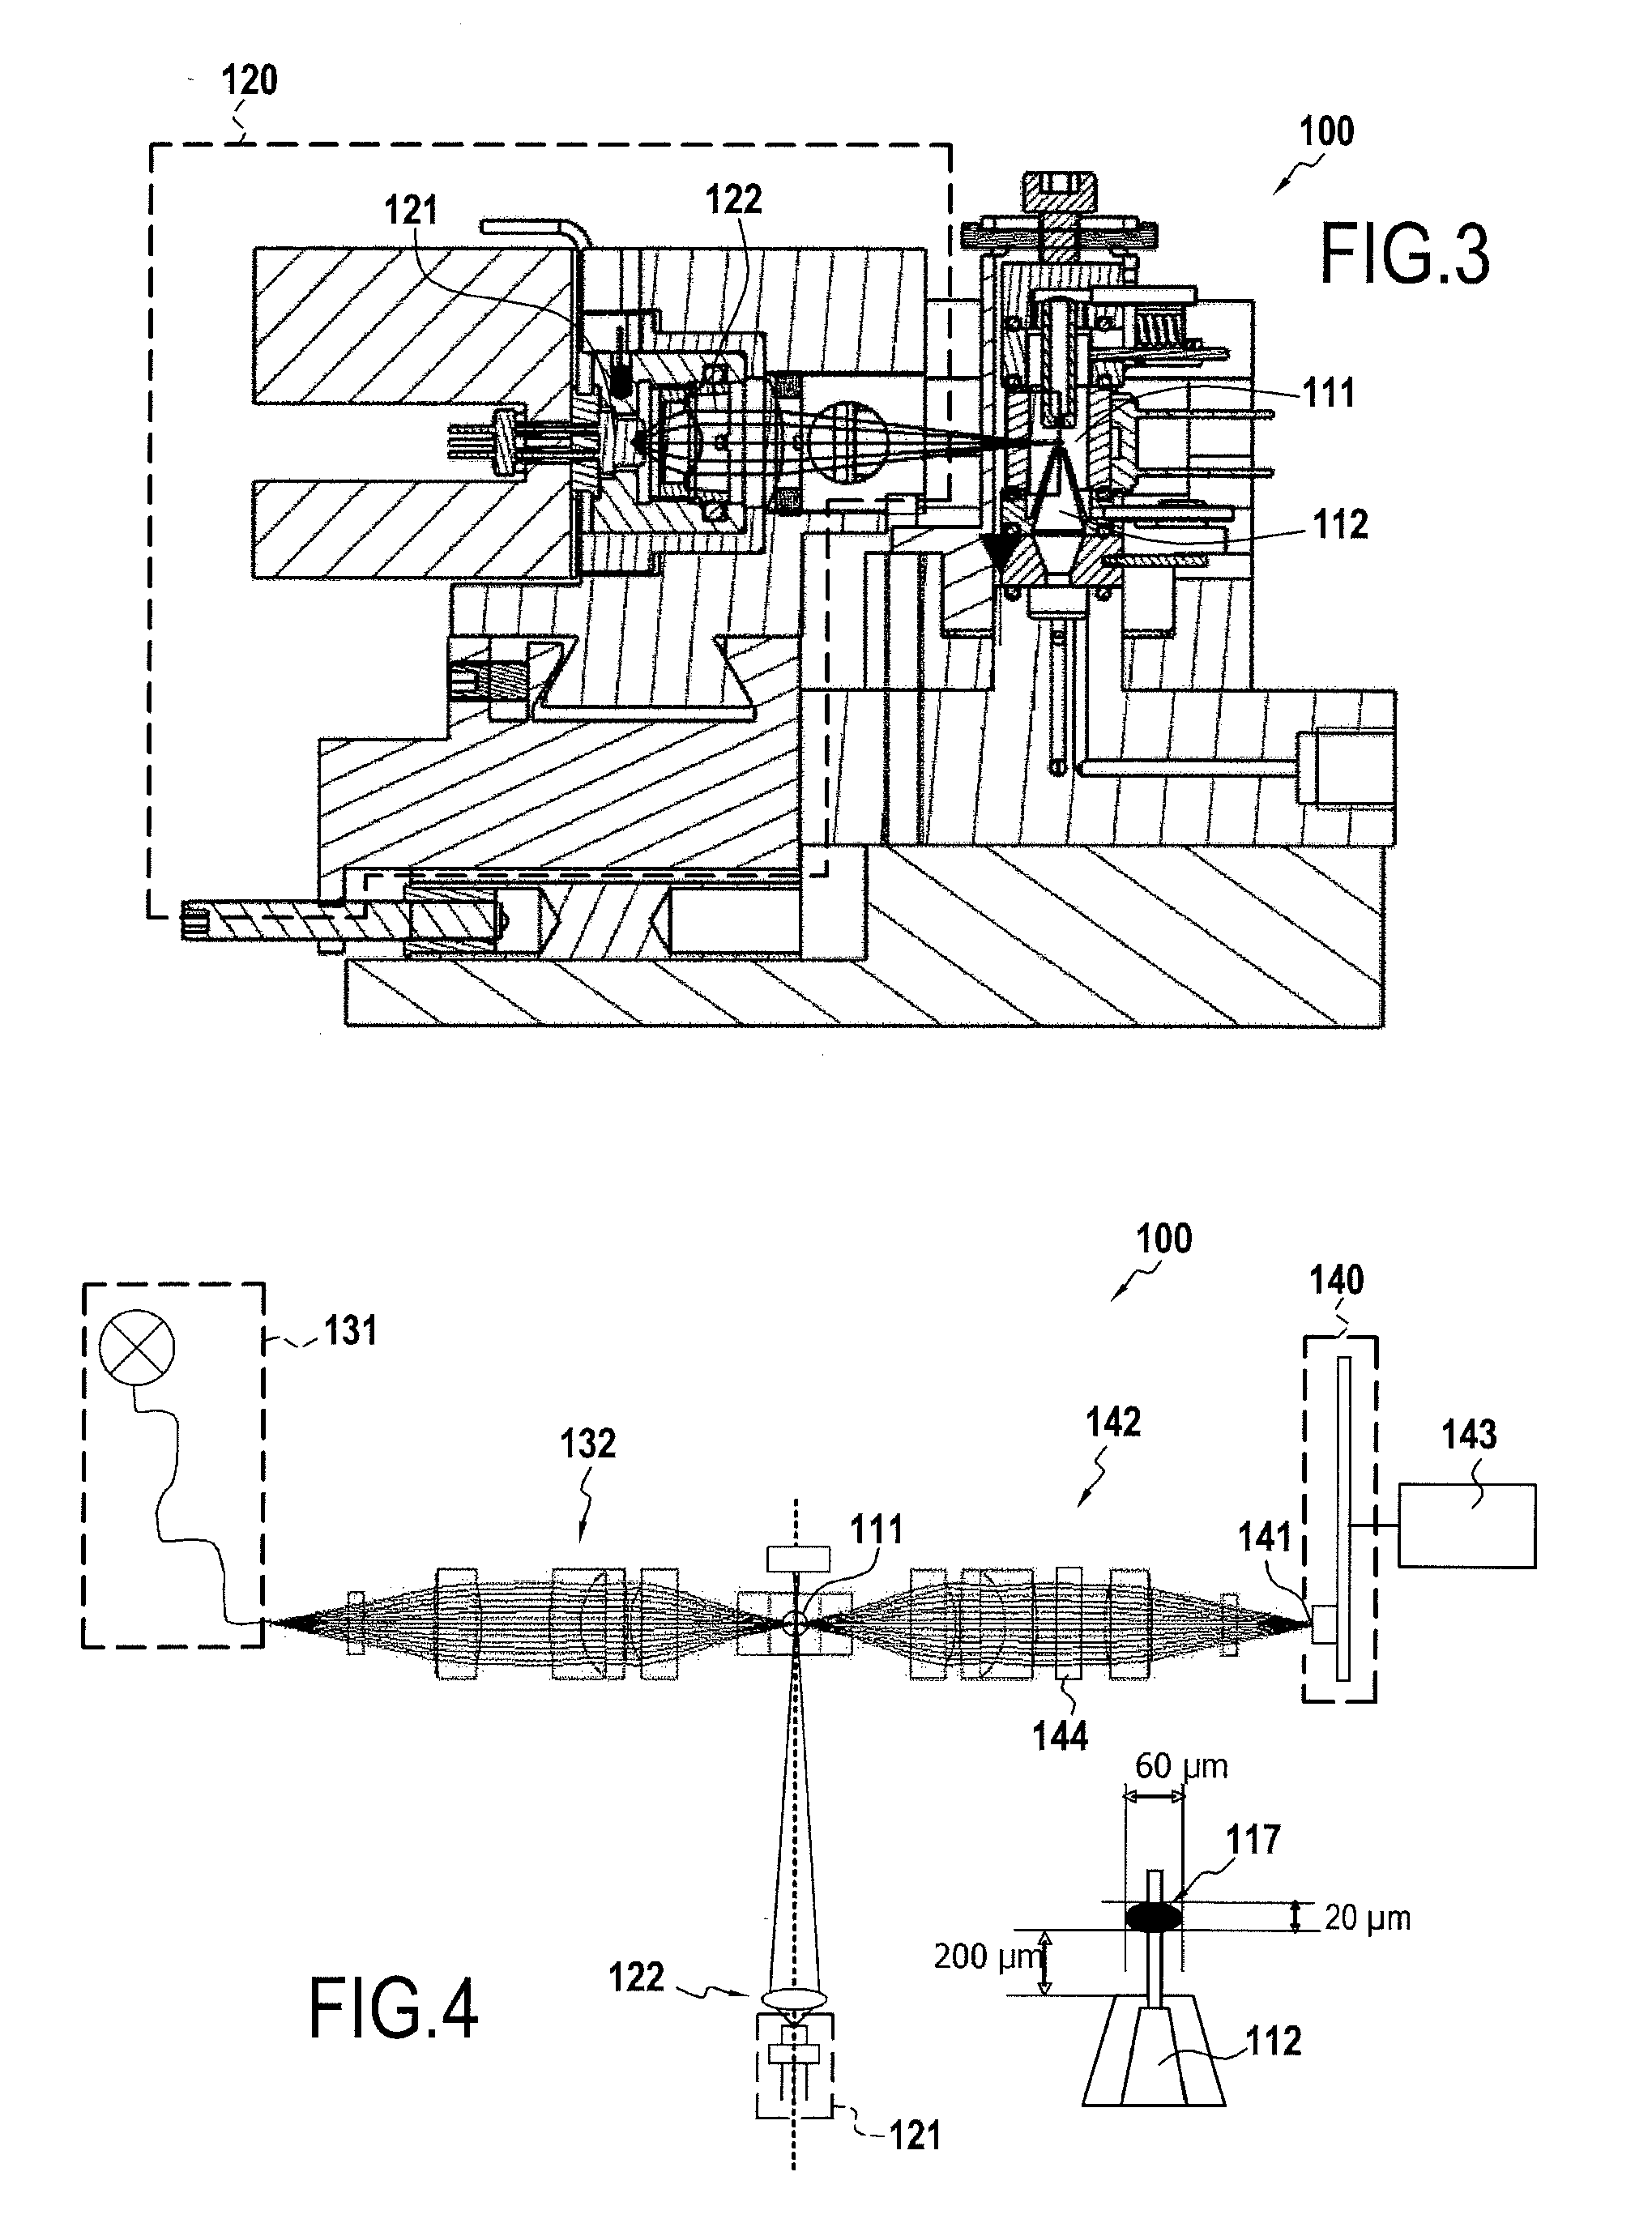 Electrooptic measurement device and method intended for classifying and counting microscopic elements